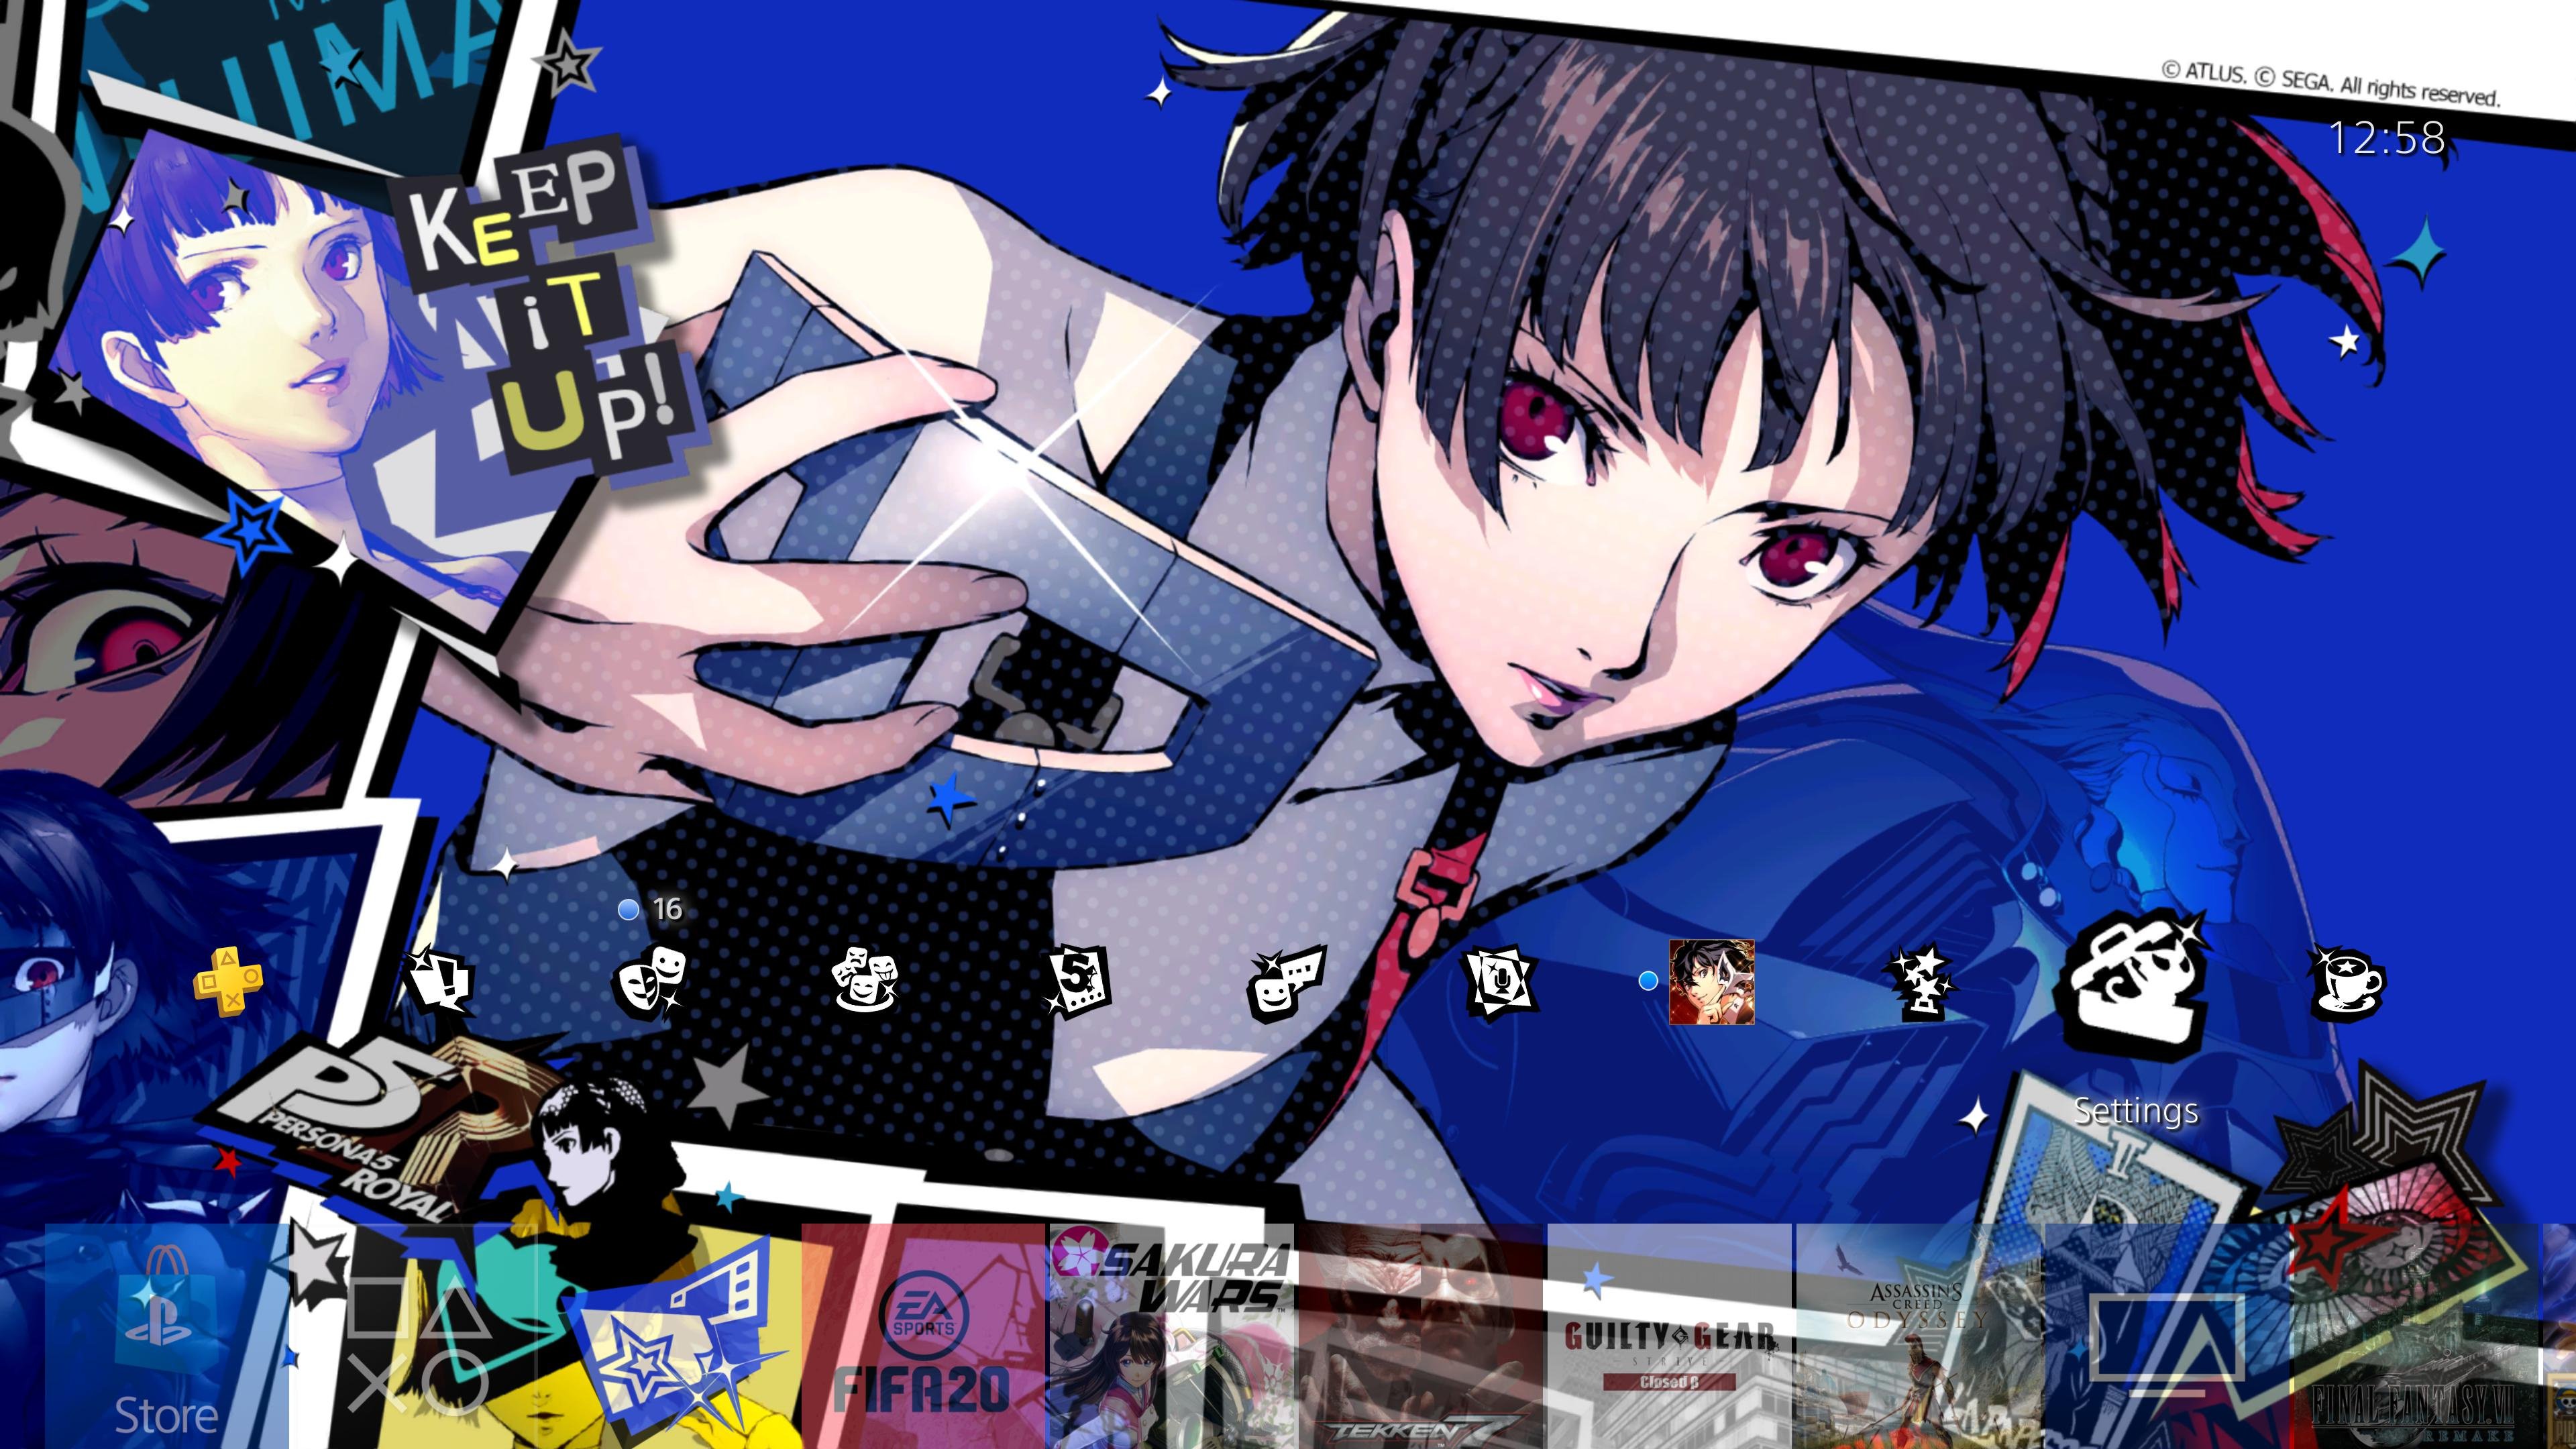 Sony Sending Out Even More Persona 5 Royal Dynamic Ps4 Themes And Avatars Push Square